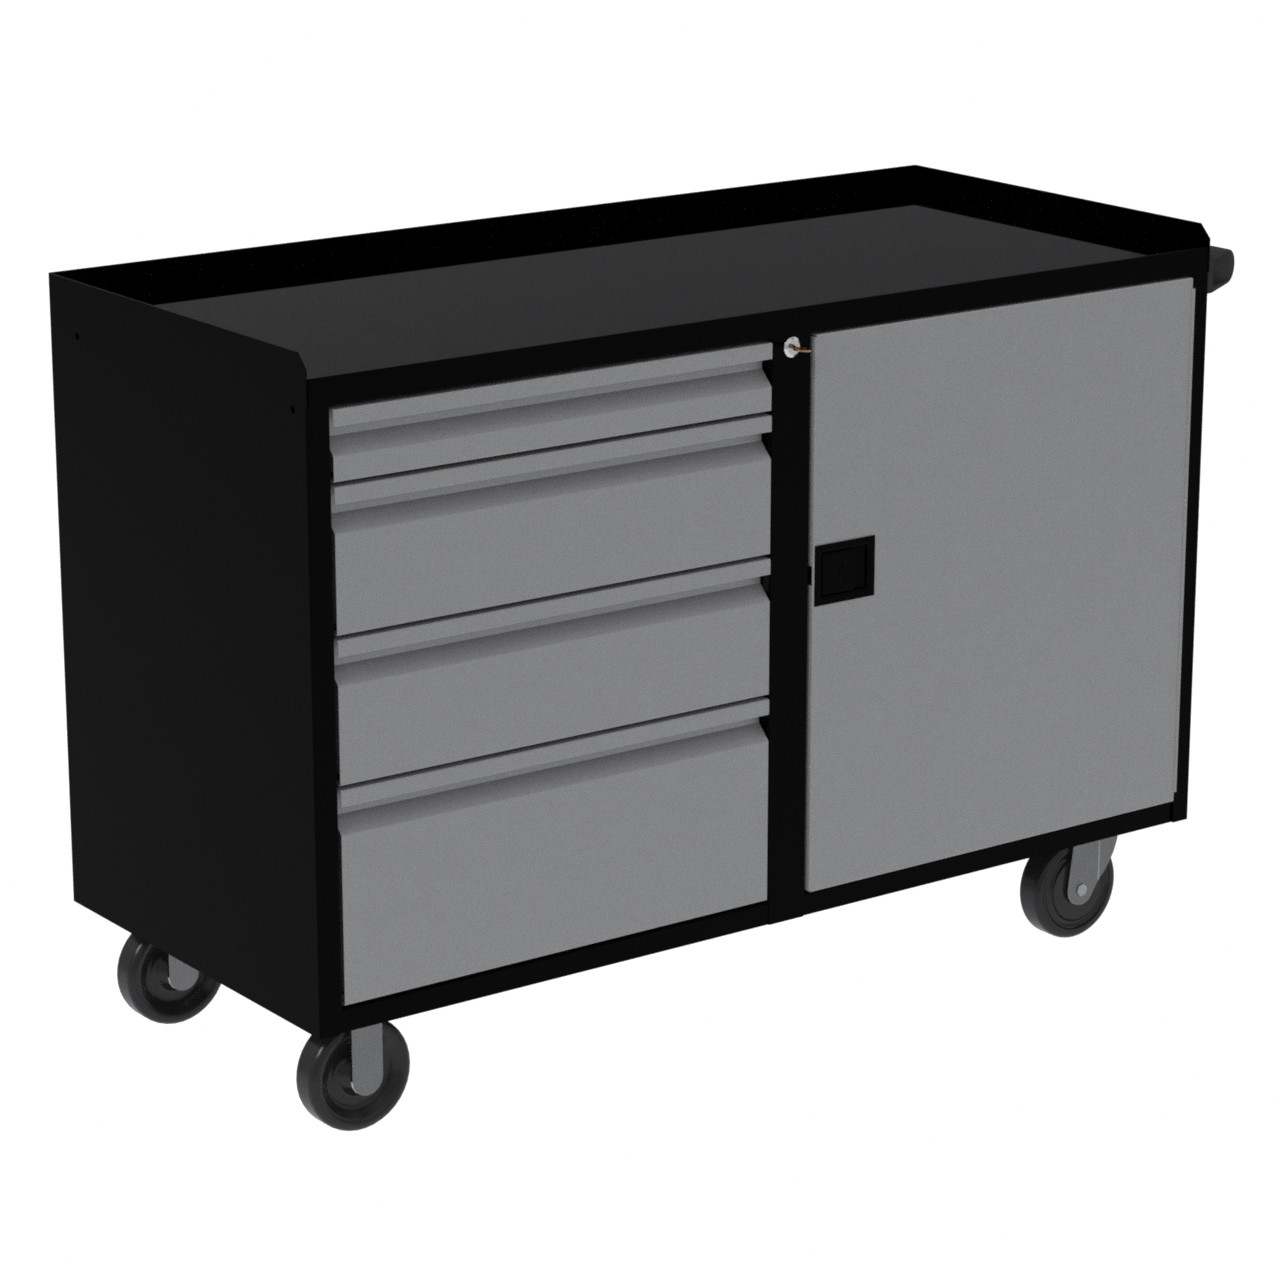 Valley Craft 48" Deluxe Mobile Workbench - 1 set of 3, 6, 6, 9" Drawers and 1 Door Black/Silver(CALL FOR BEST PRICING)